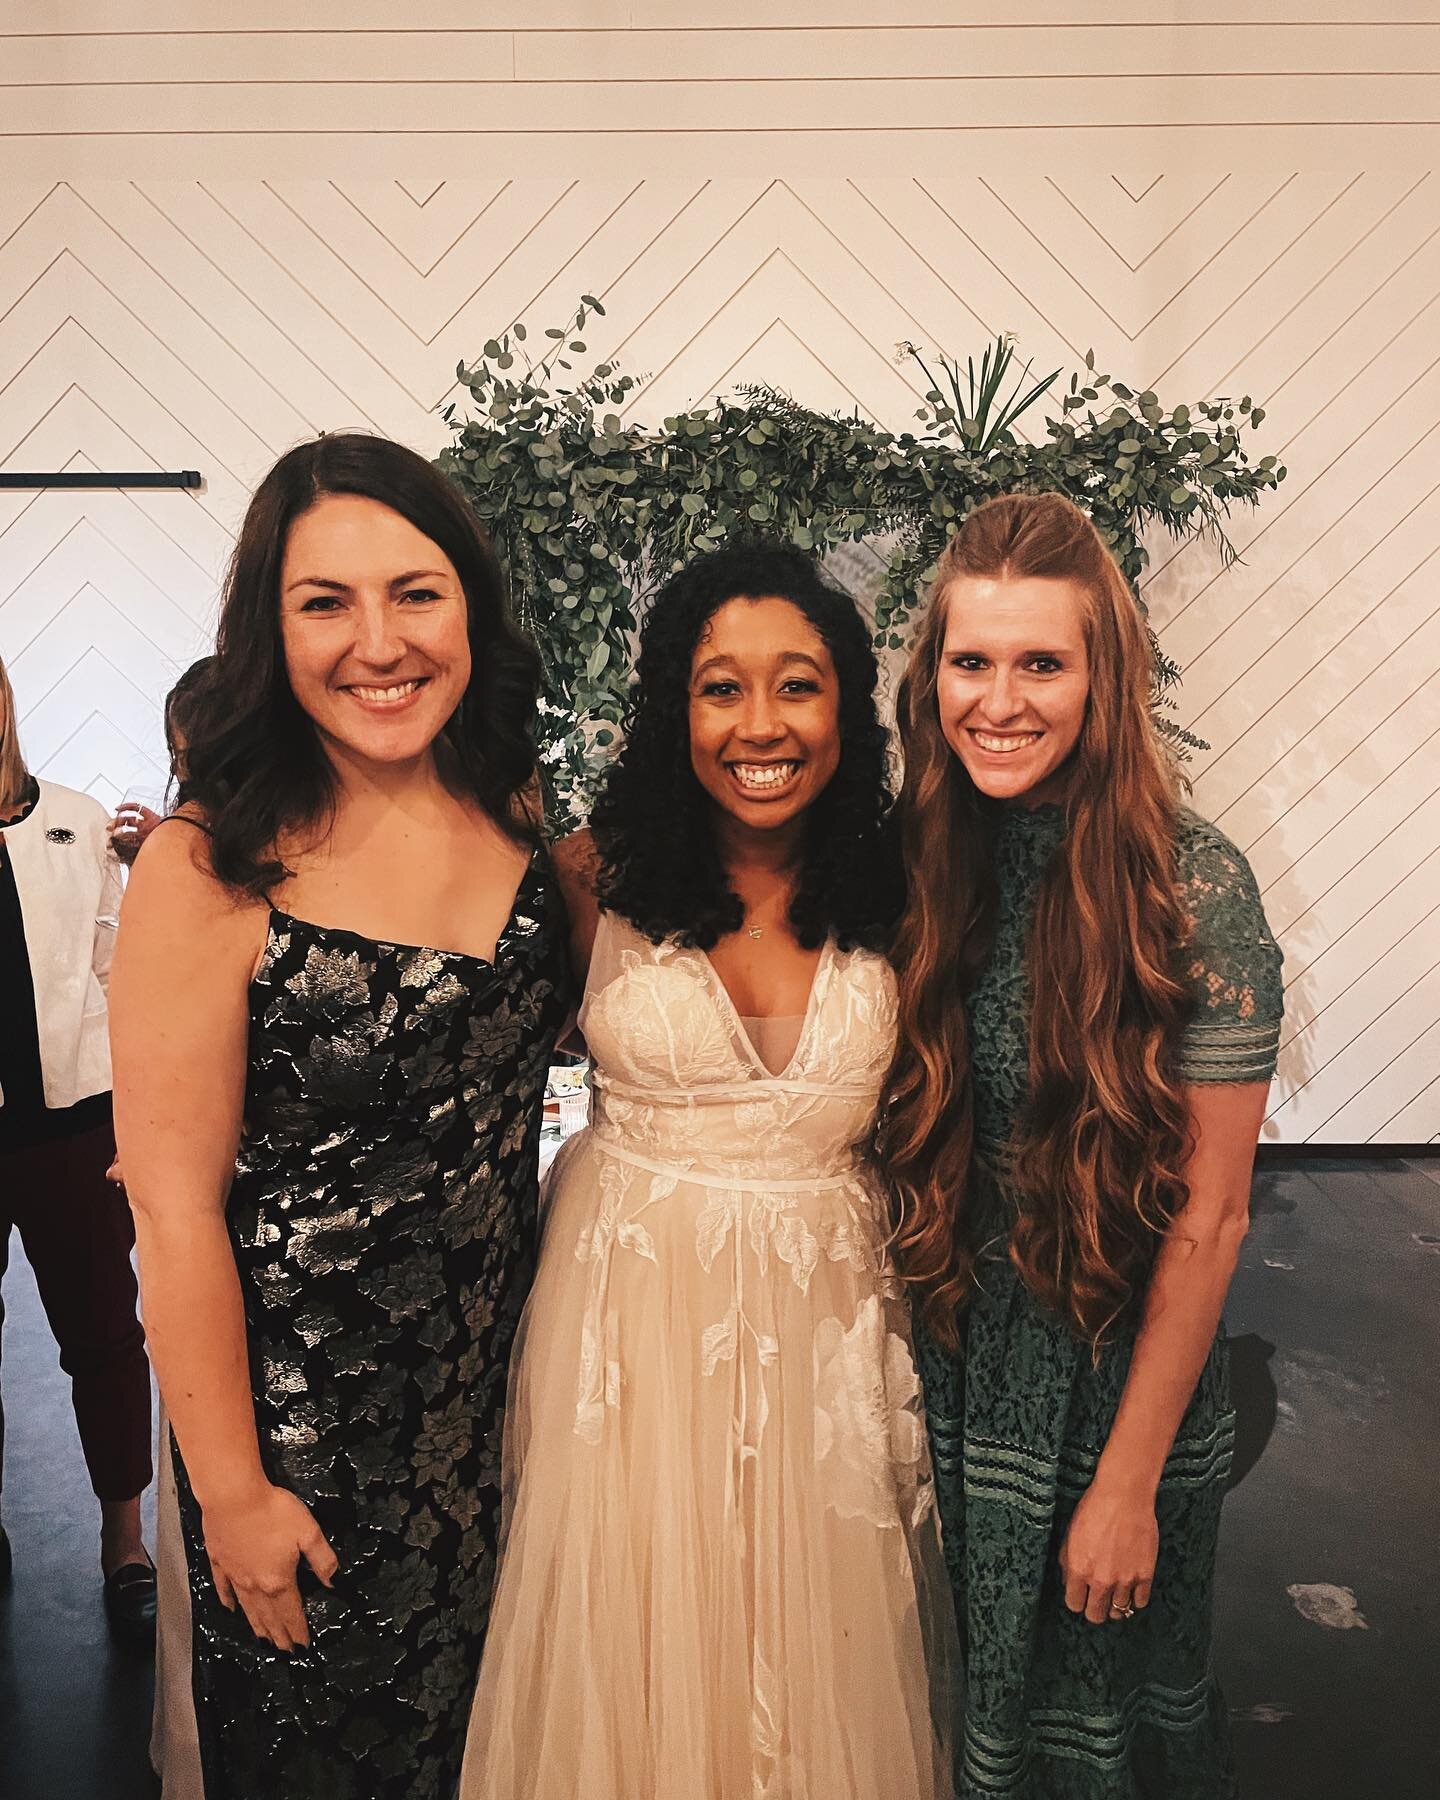 Reunited with some of my favorite people to celebrate my college roomie get married to the man of her dreams. 

Oh, Portland was pretty cool too🌲 
#mywheaton